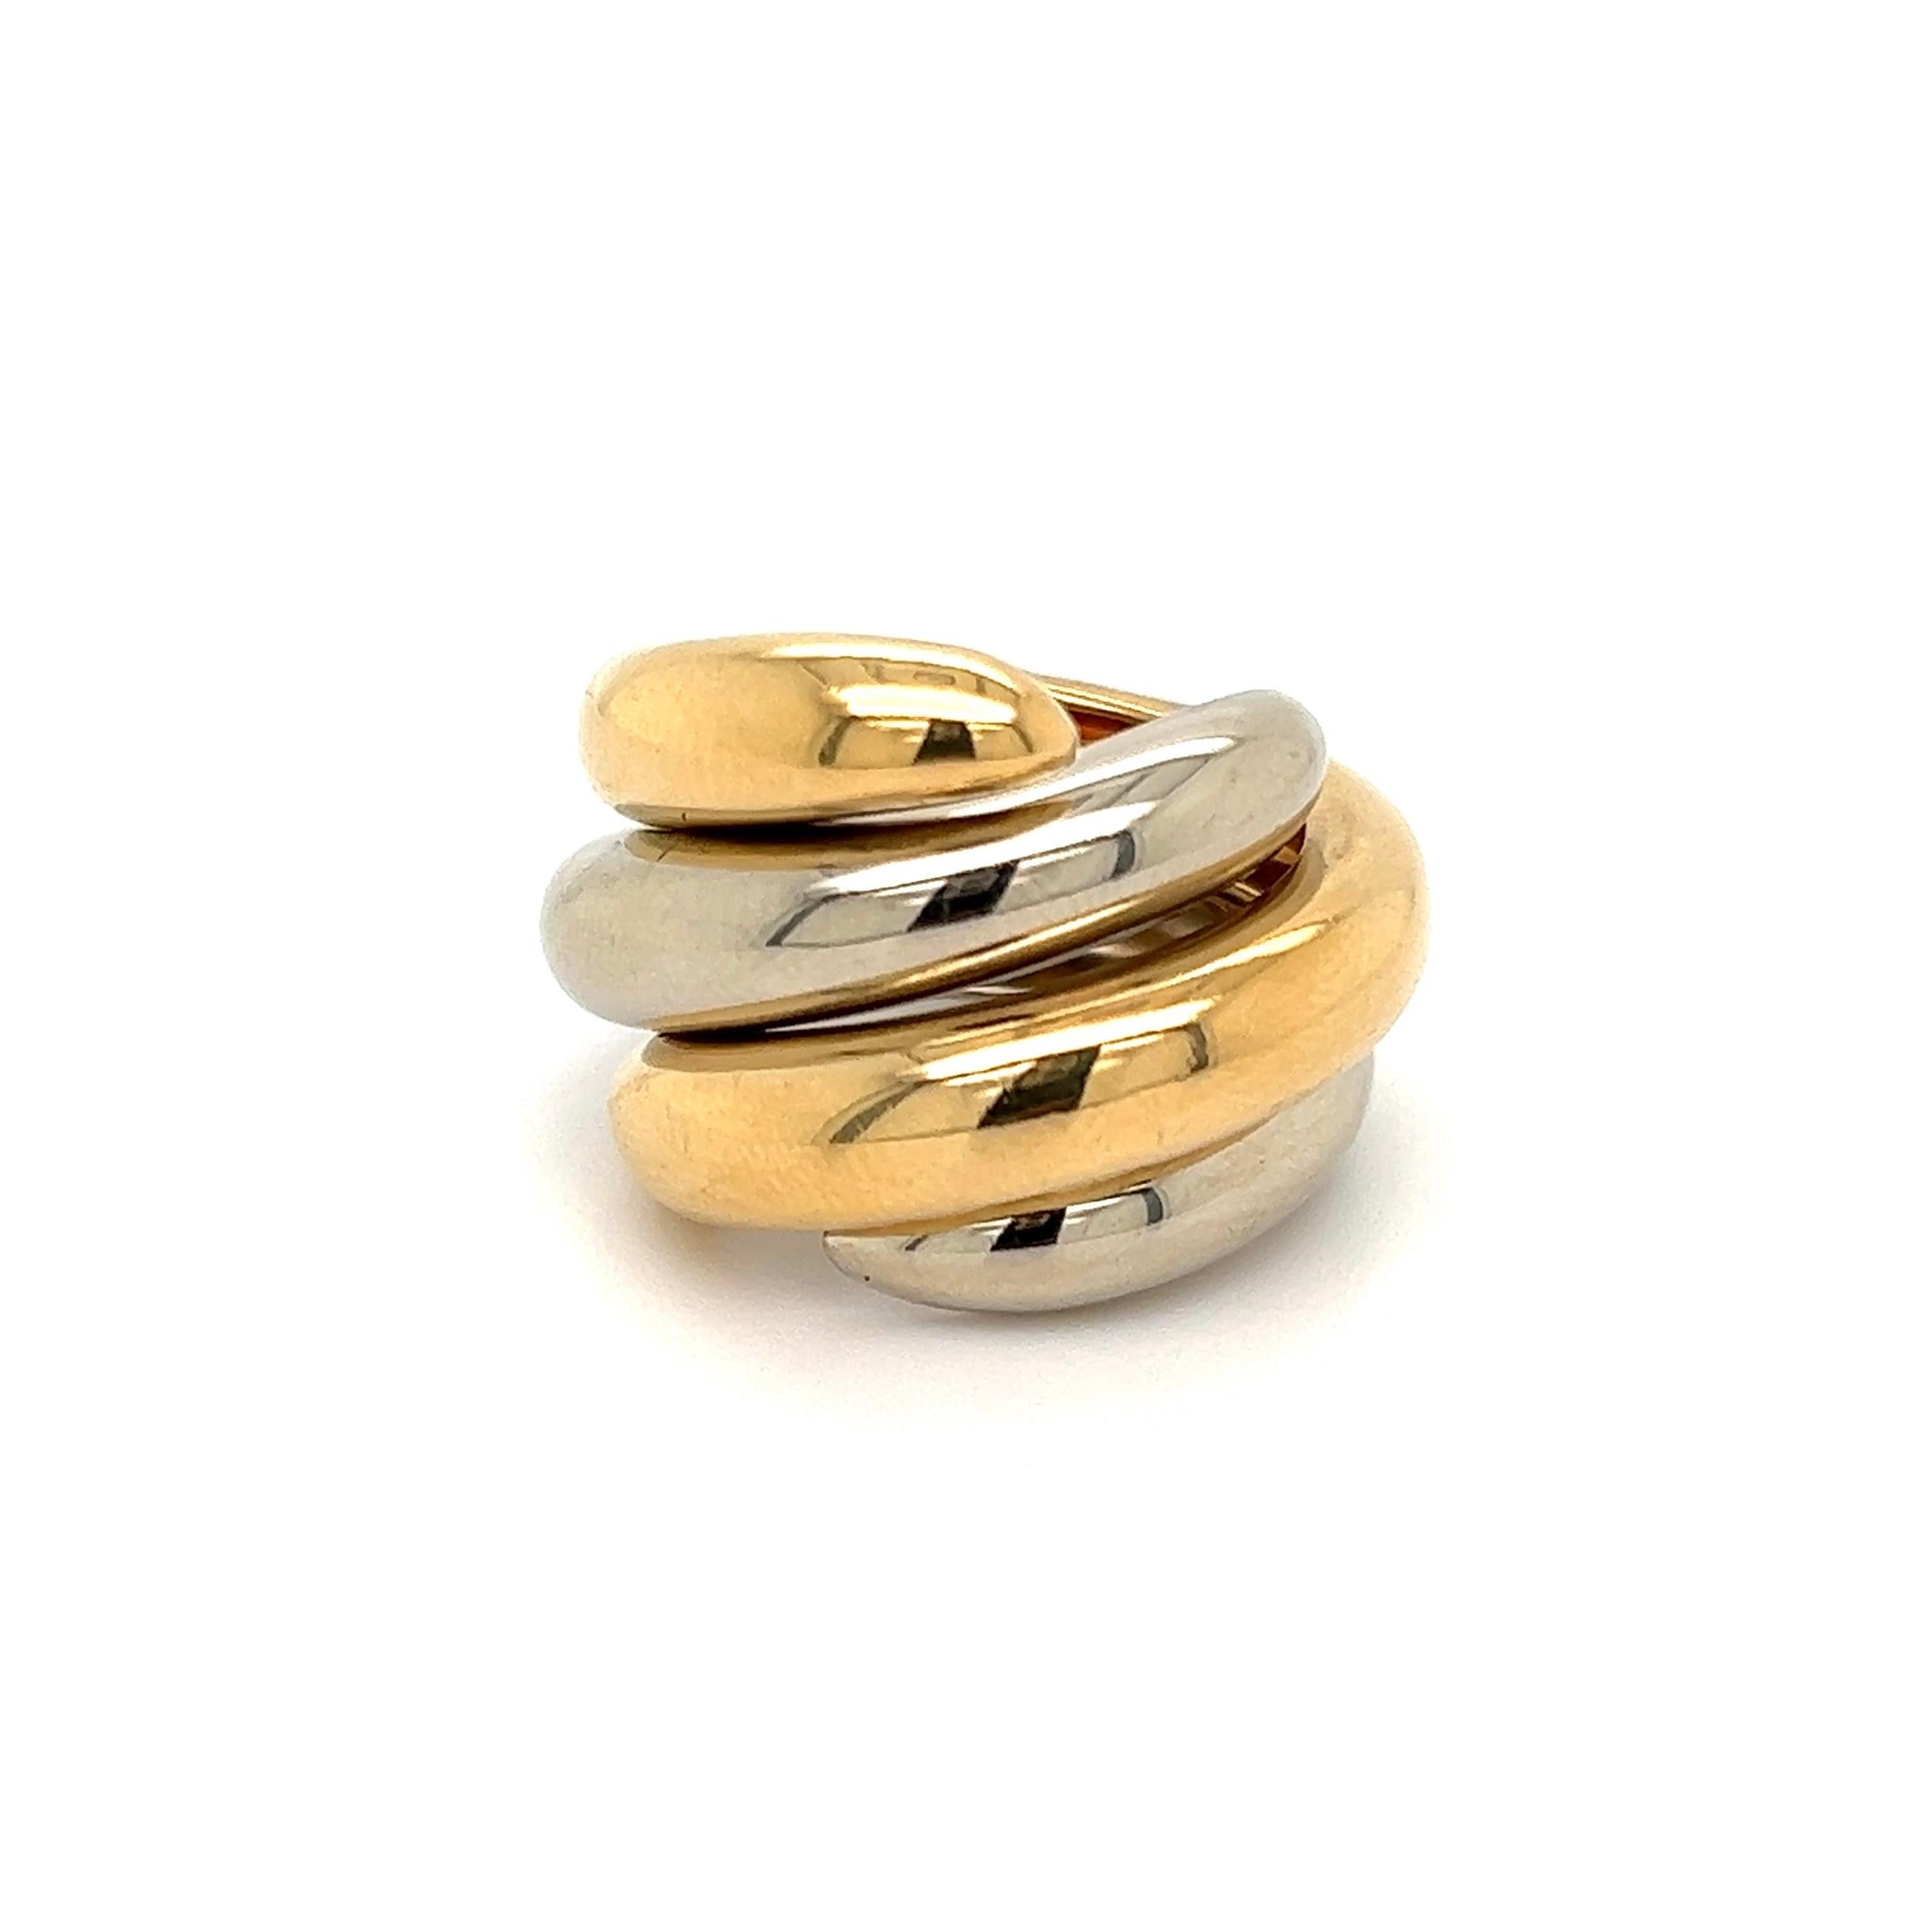 Mid-Century Modern Chaumet France Spiral Gold Band Rings Estate Fine Jewelry 1